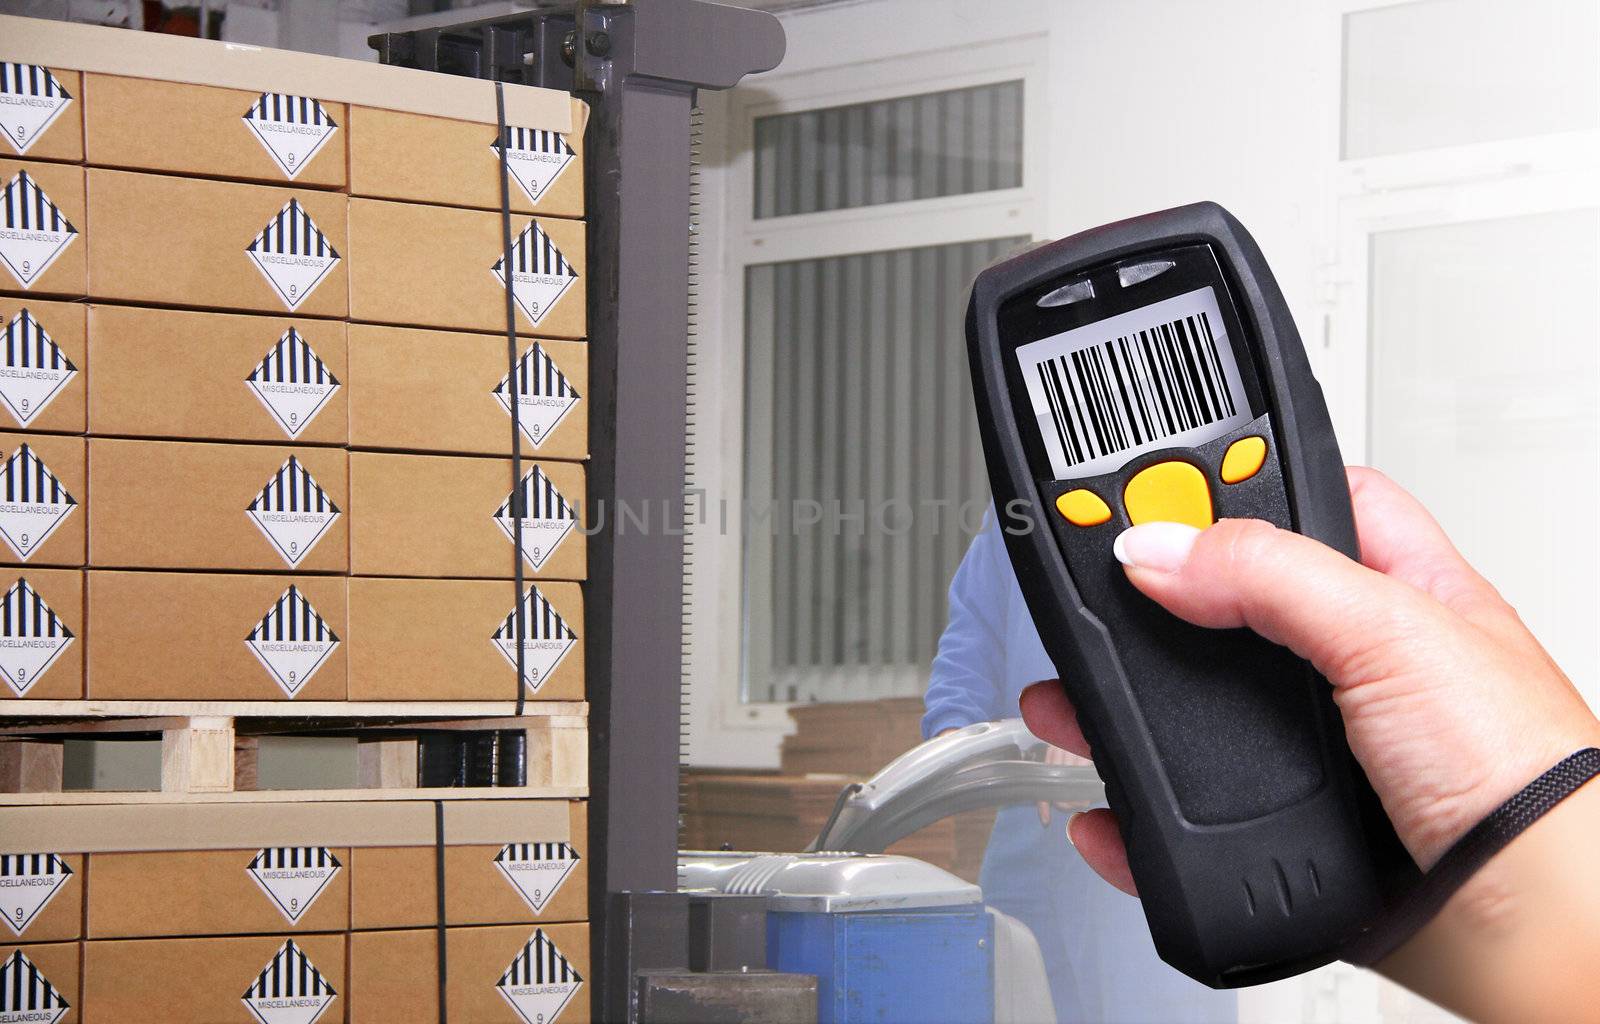 Handheld Computer for barcode scanning identification